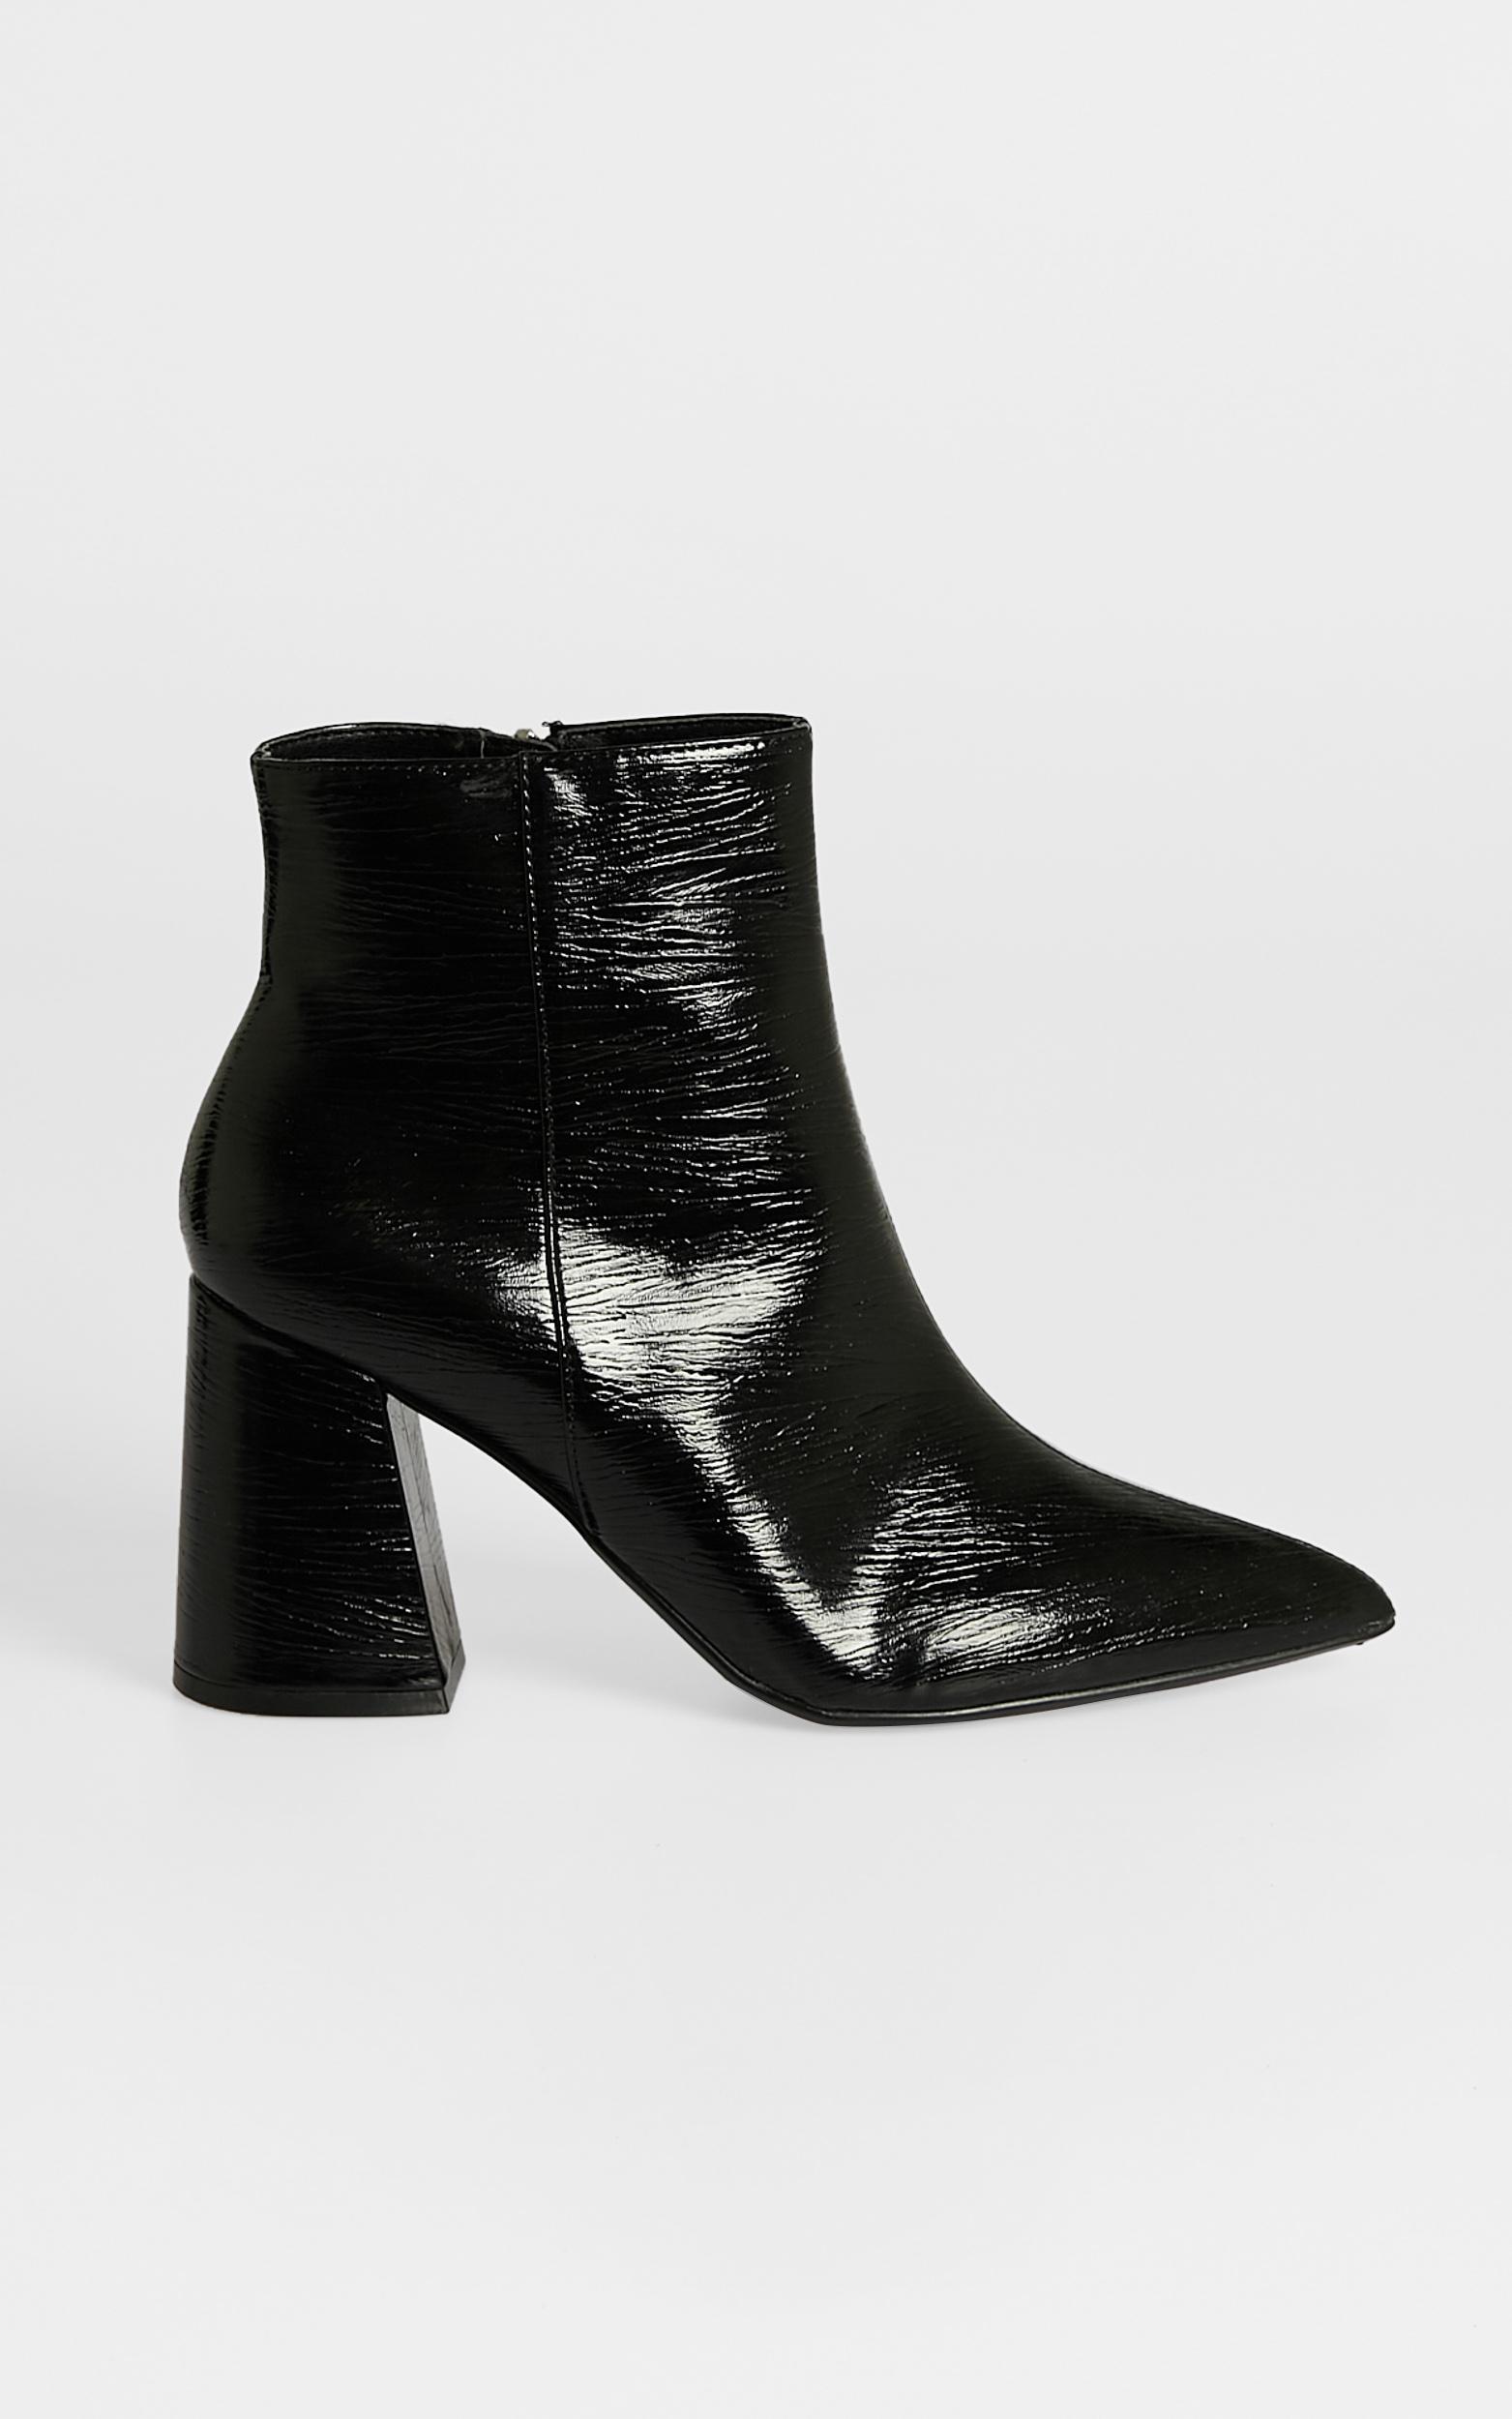 Therapy - Cleo Boots in Black Crinkle Patent - 05, BLK4, hi-res image number null